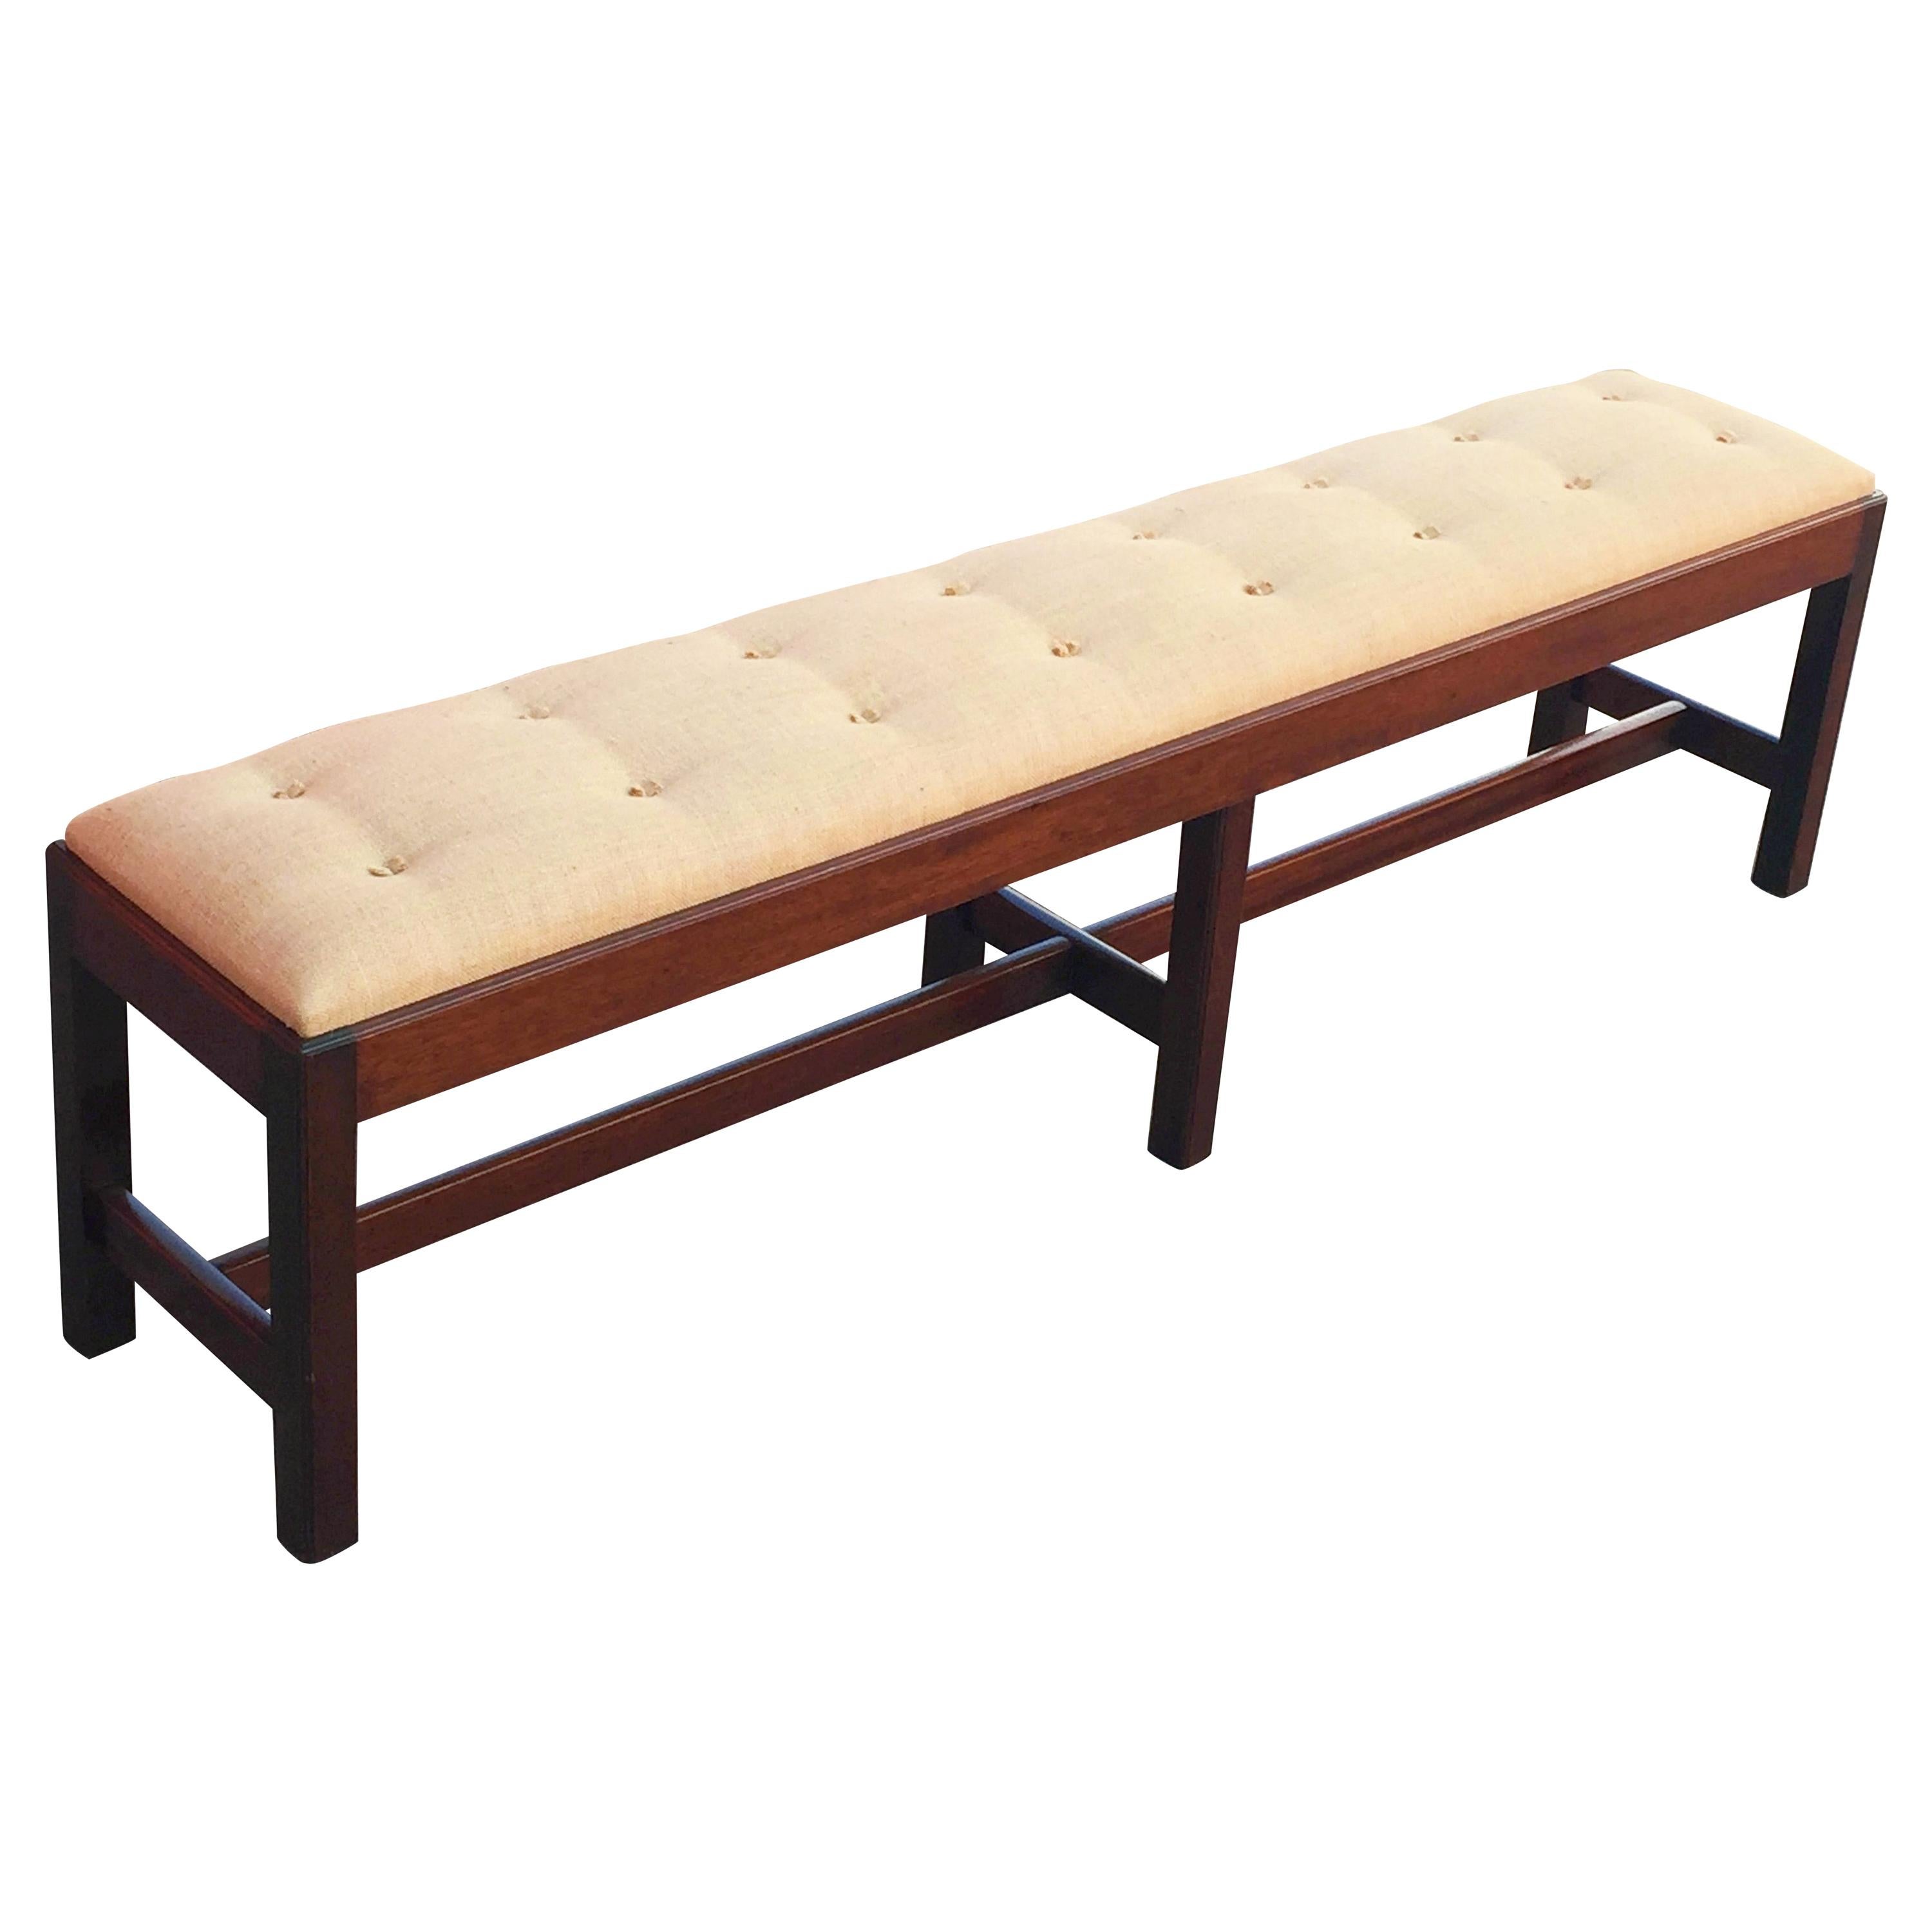 English Upholstered Long Bench or Seat of Mahogany with Tufted Cushion Top